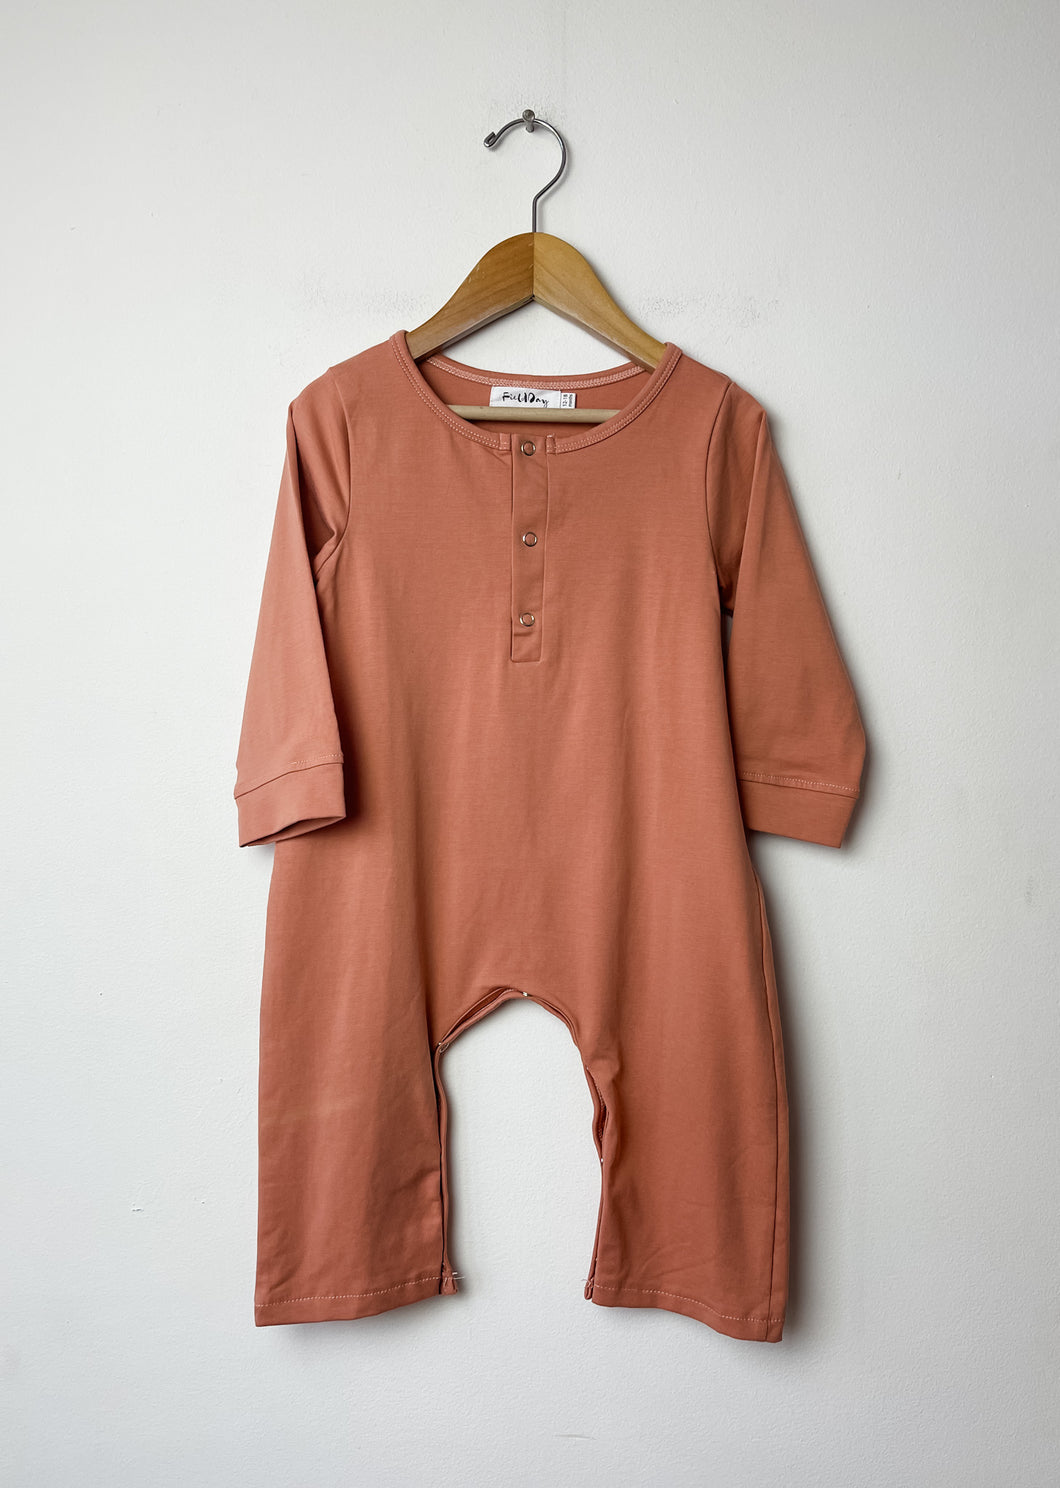 Pink Field Day (Kindly the Label) Romper Size 12-18 Months